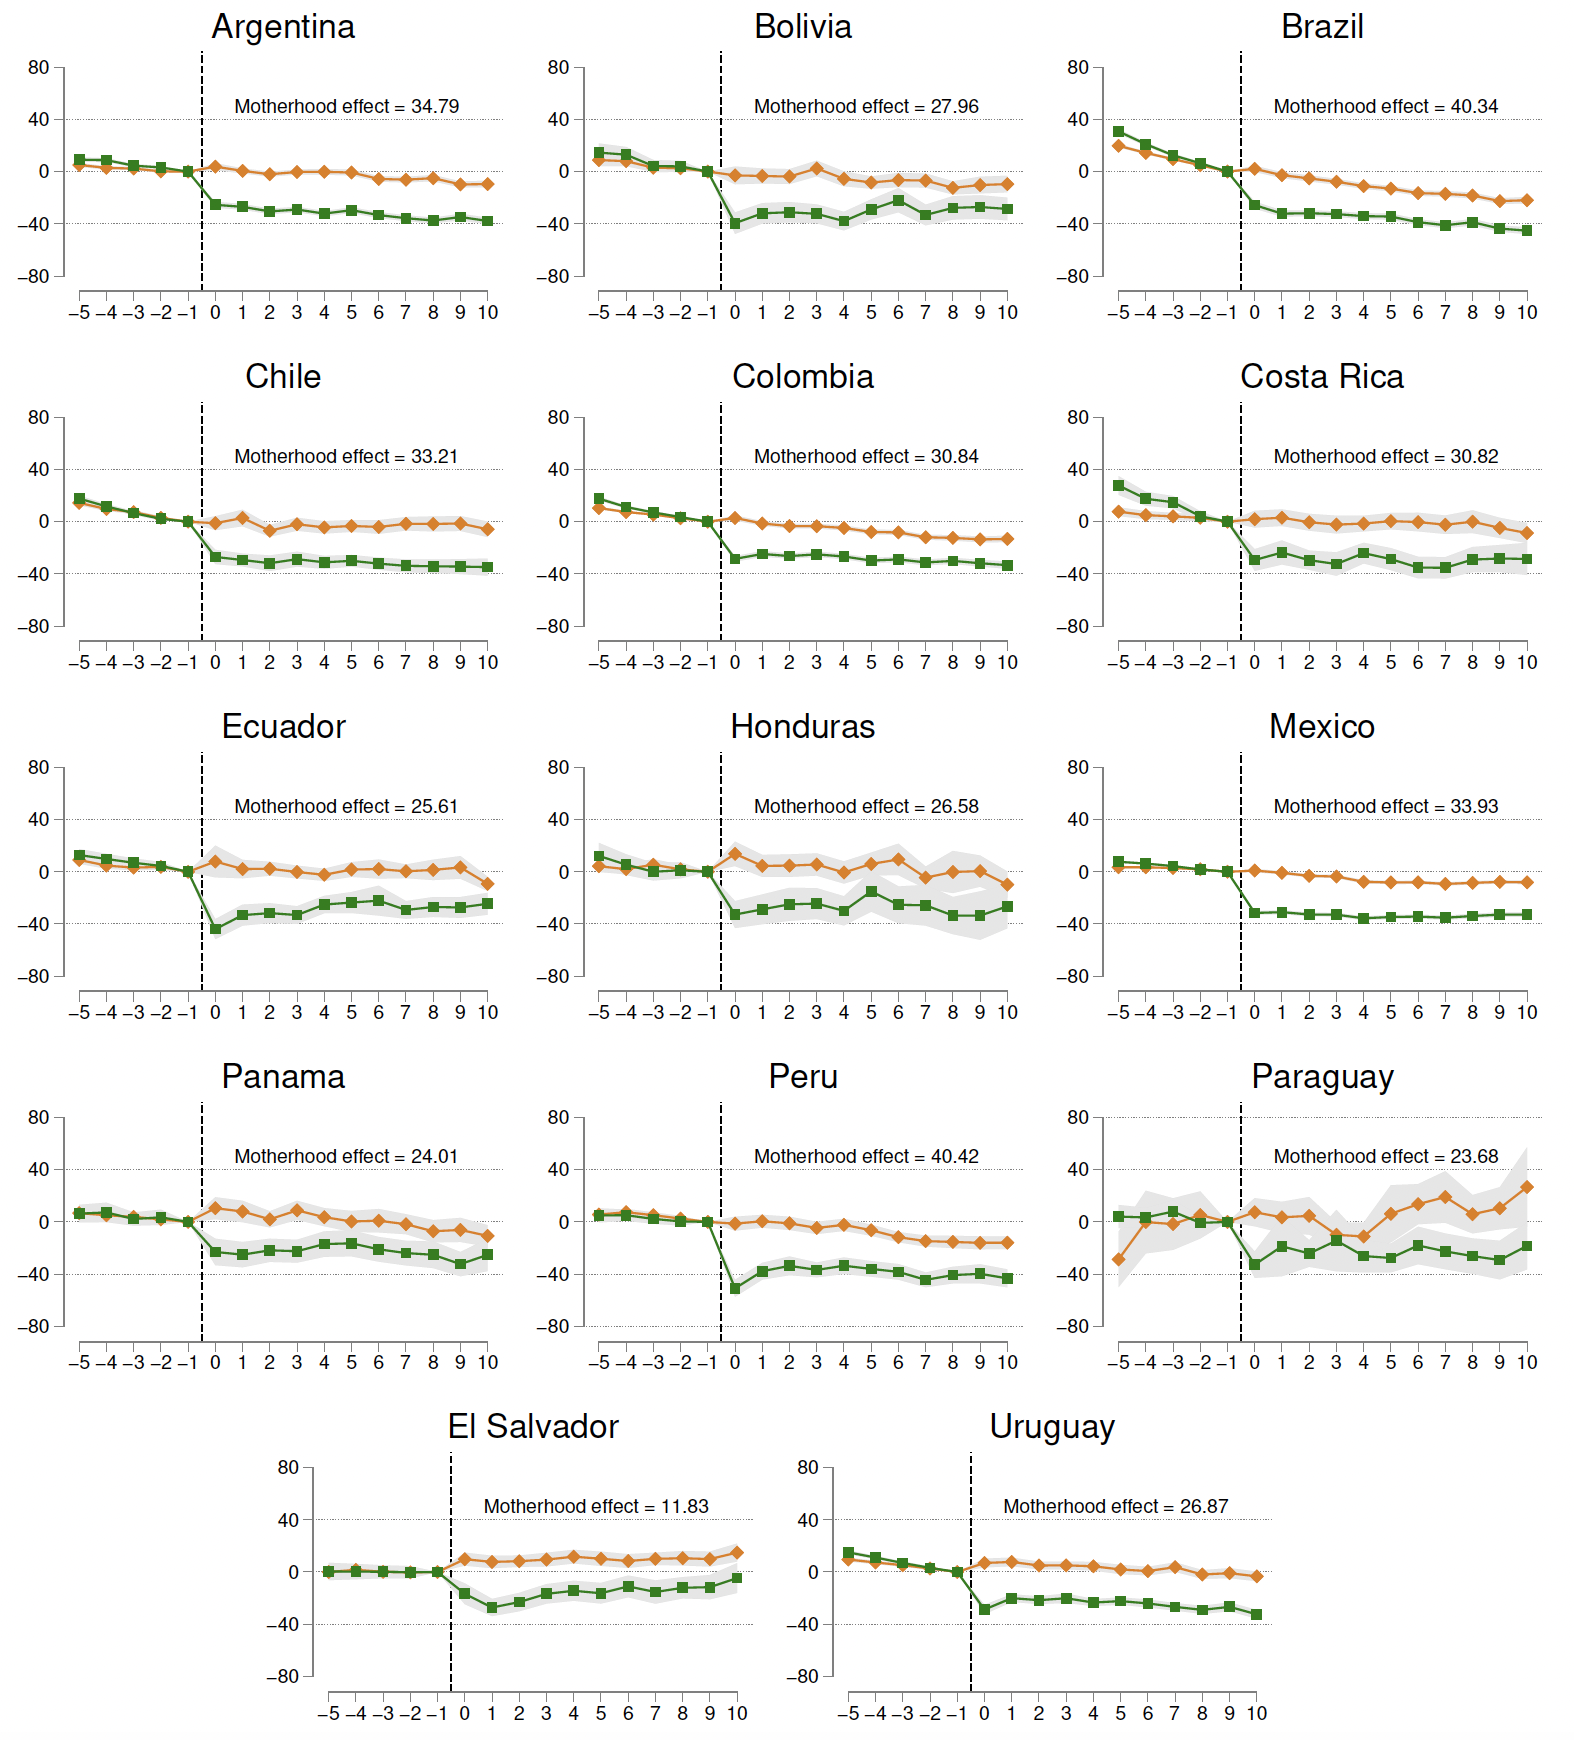 Figure 3 Parenthood effect on labour earnings across Latin American countries